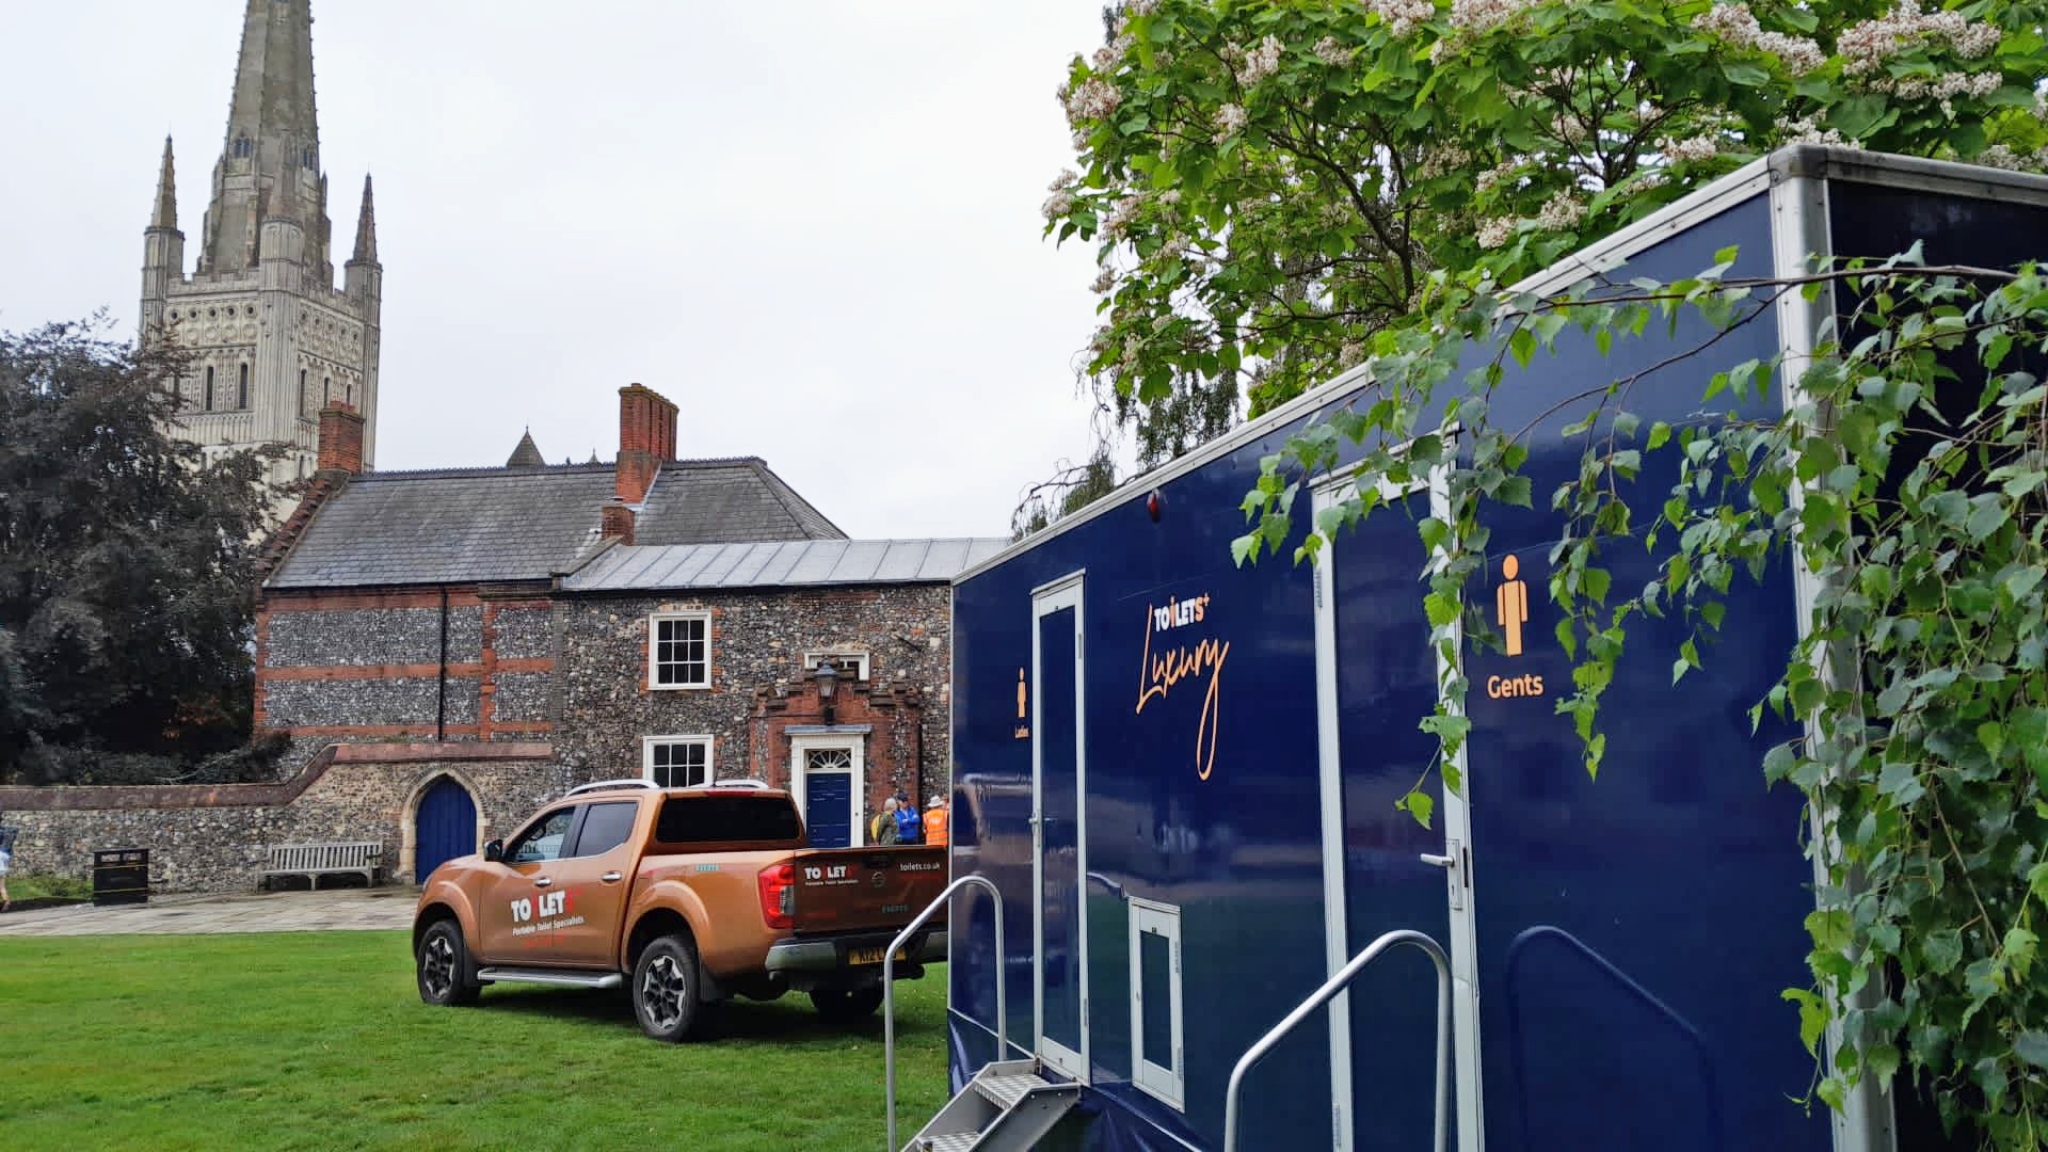 luxury toilet trailers for hire in norwich cathedral grounds